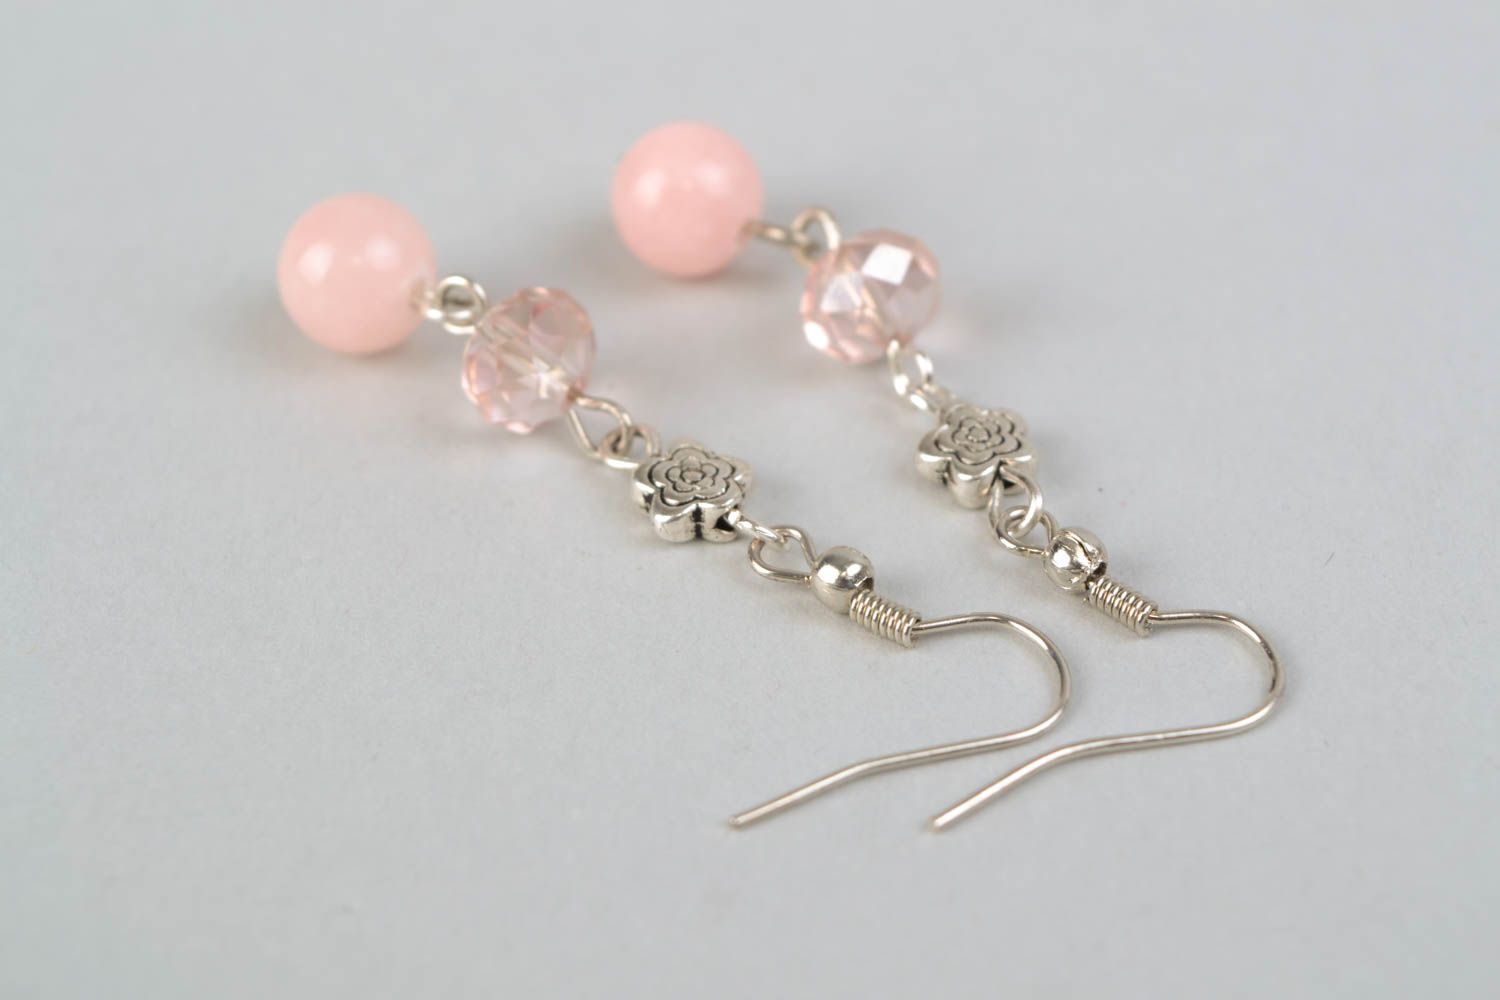 Metal earrings with pink quartz beads photo 4